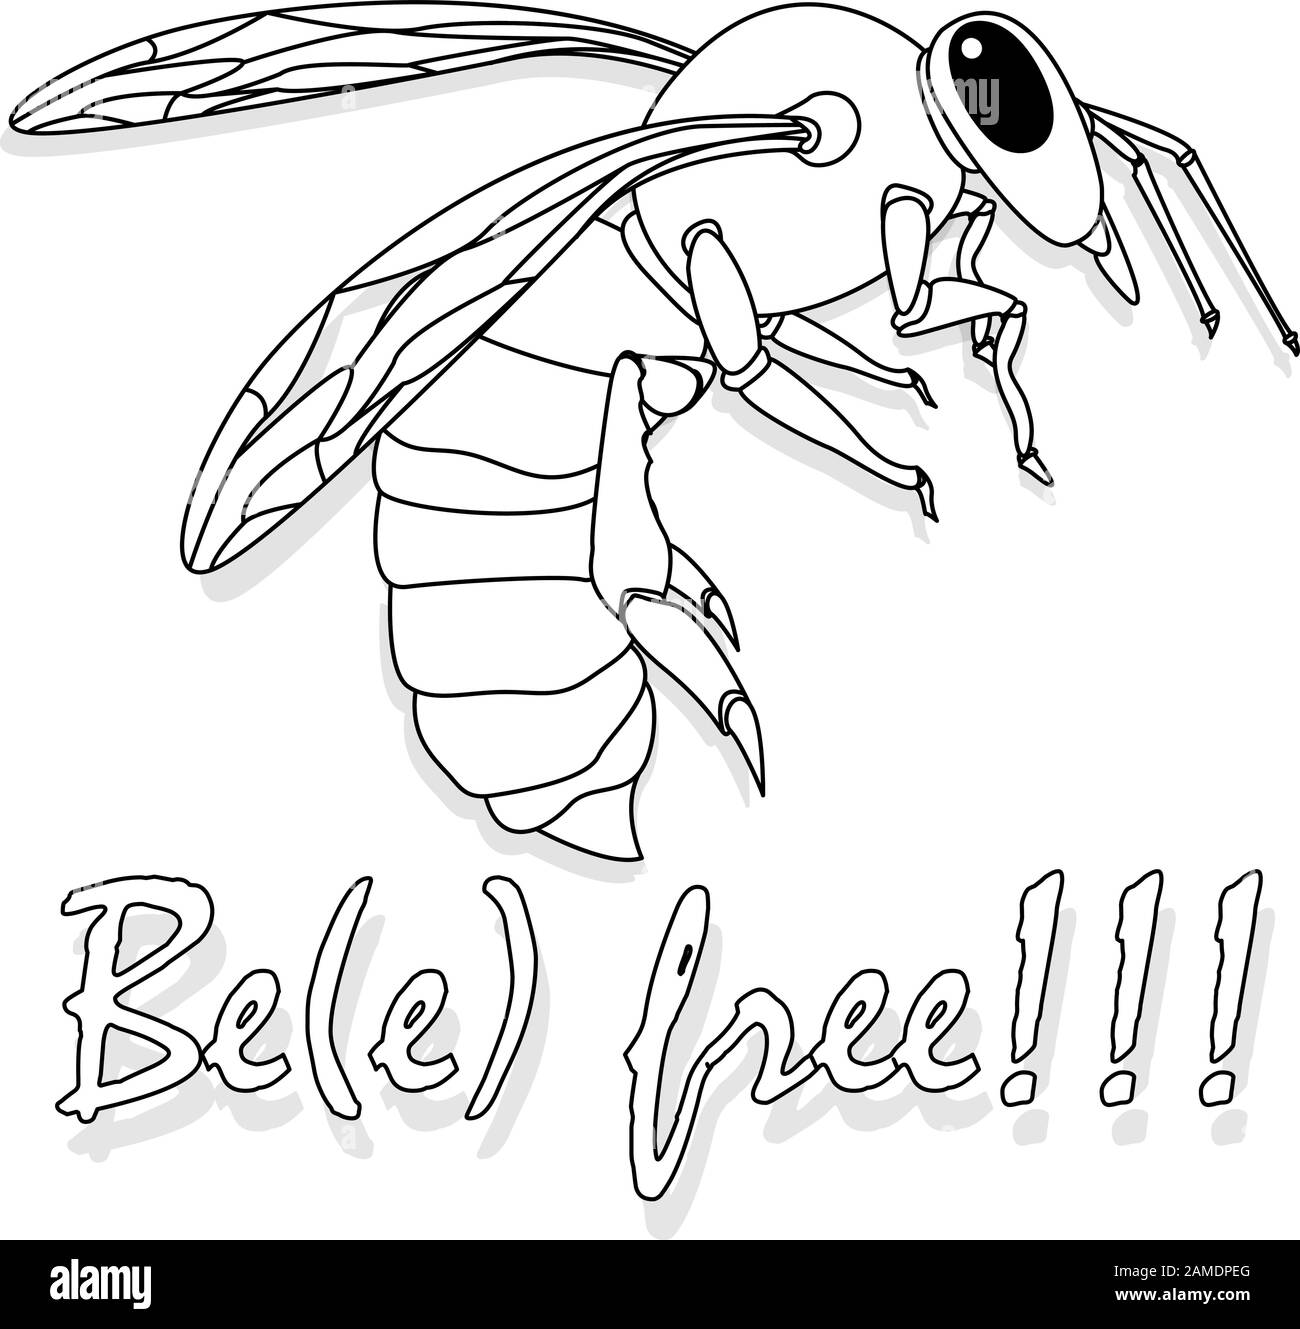 Bee monochrome illustration - vector text quotes and bee drawing. Lettering poster or t-shirt textile graphic design. Stock Vector